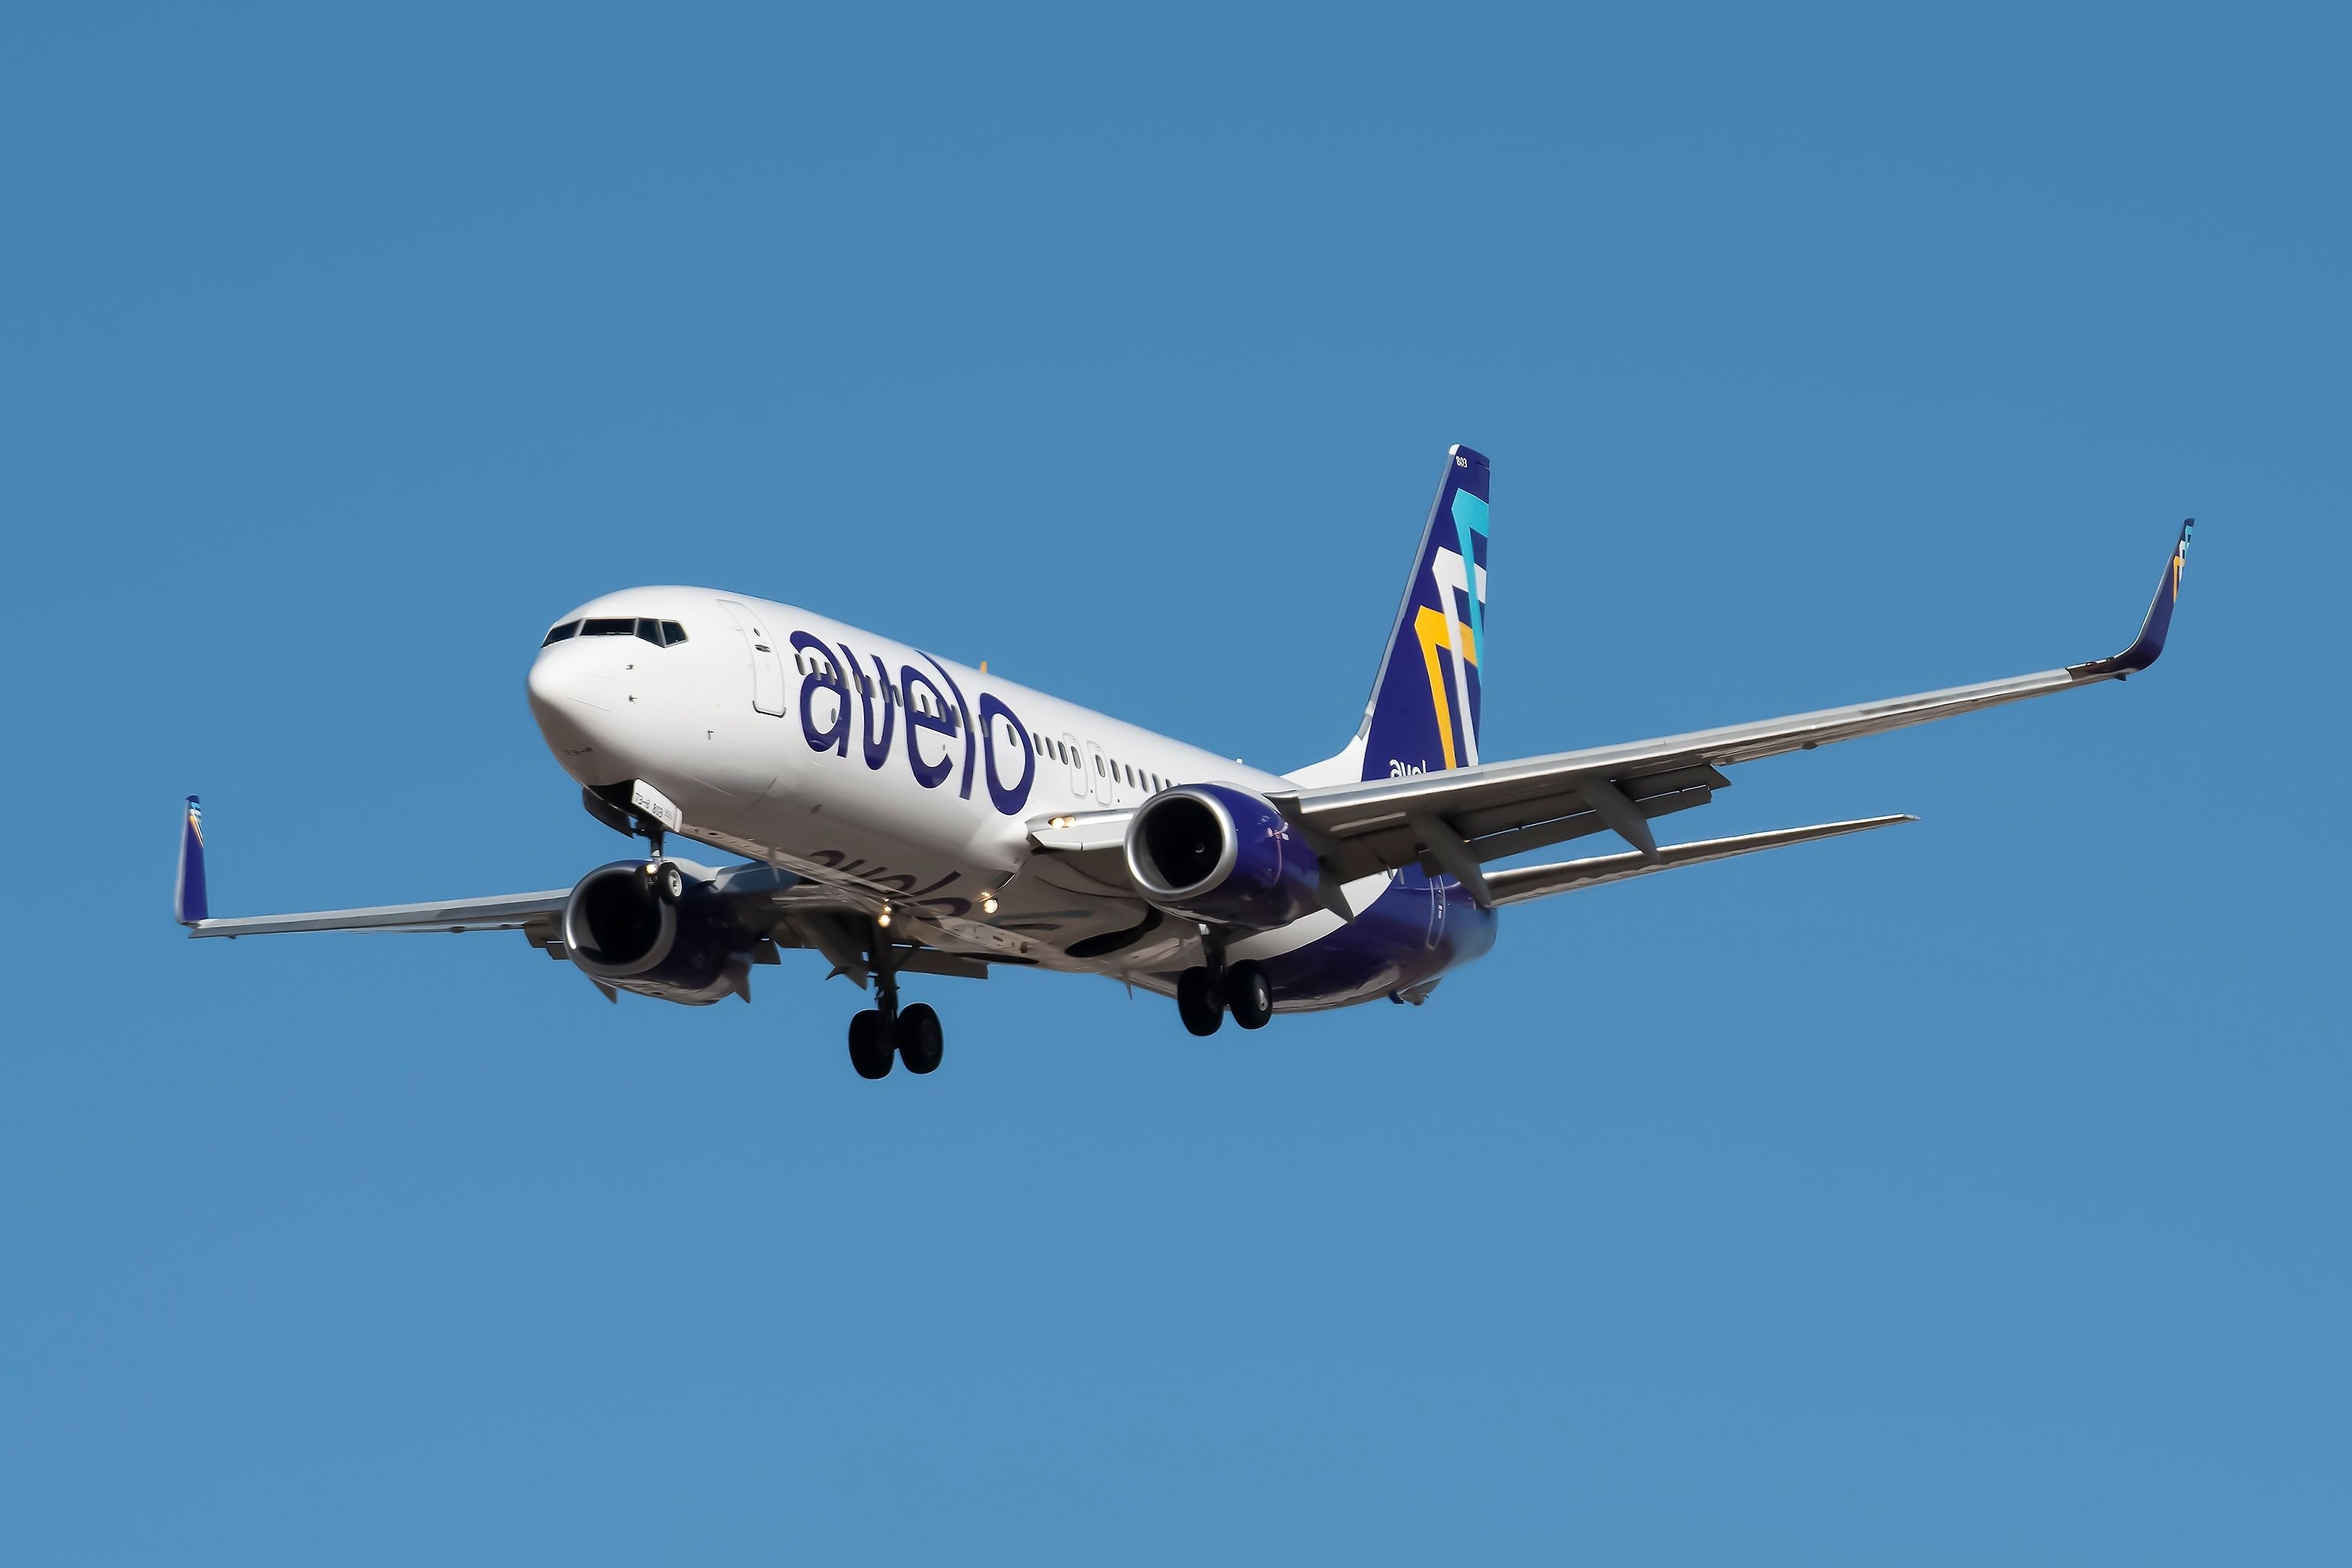 Avelo Airlines Boeing 737-800